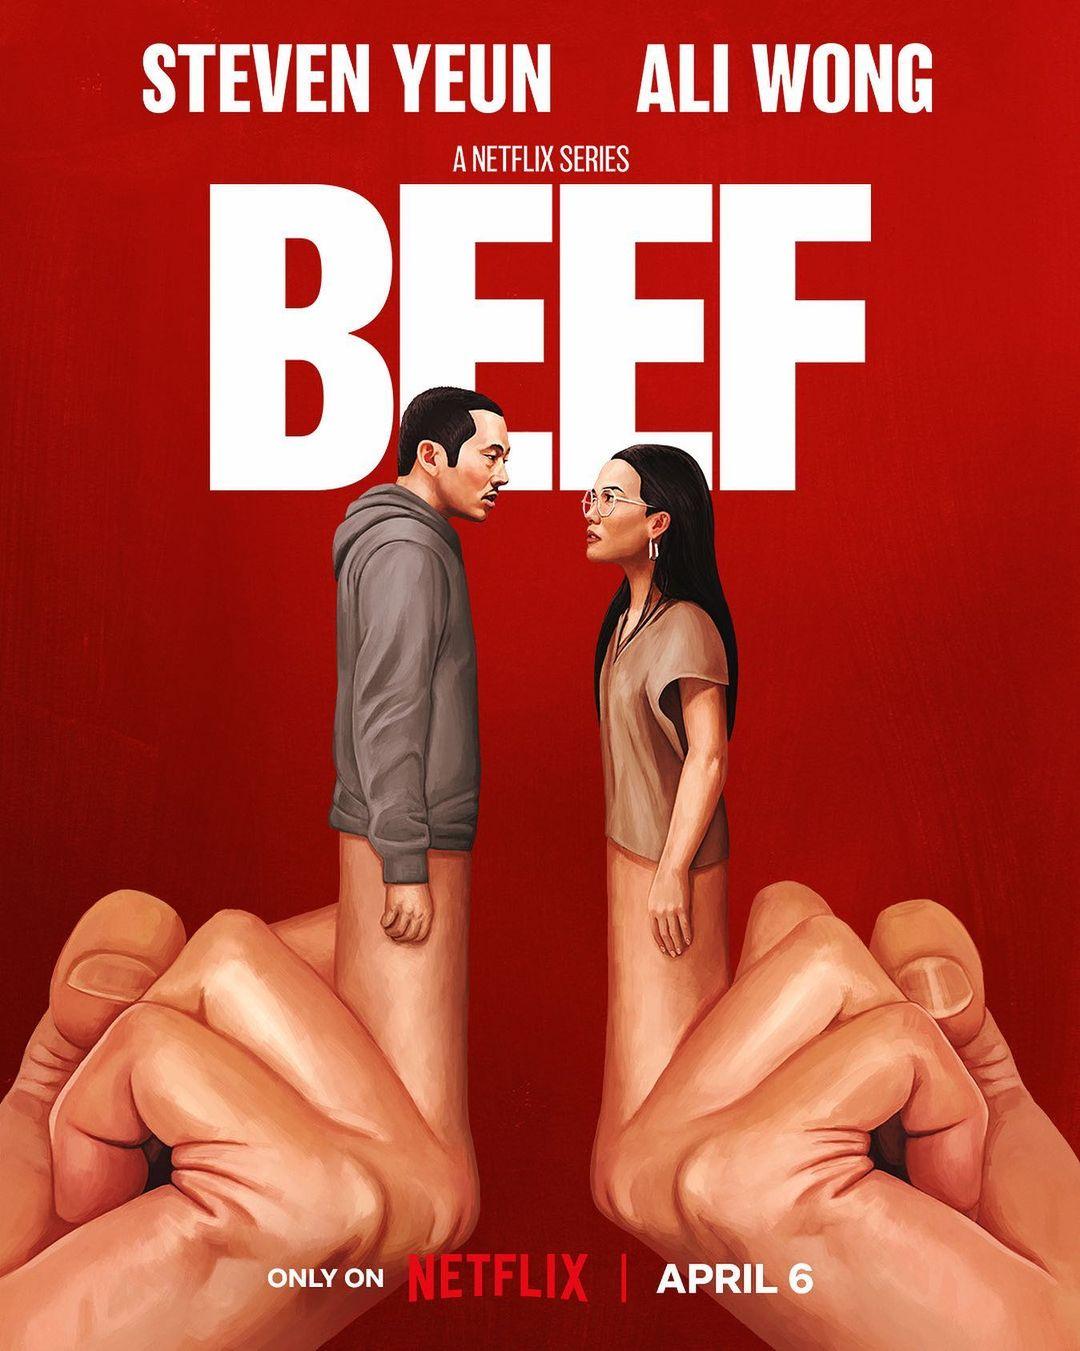 Netflix Strikes Gold With Hit New Comedy, 'Beef,' As The Show Receives Perfect Score On Rotten Tomatoes